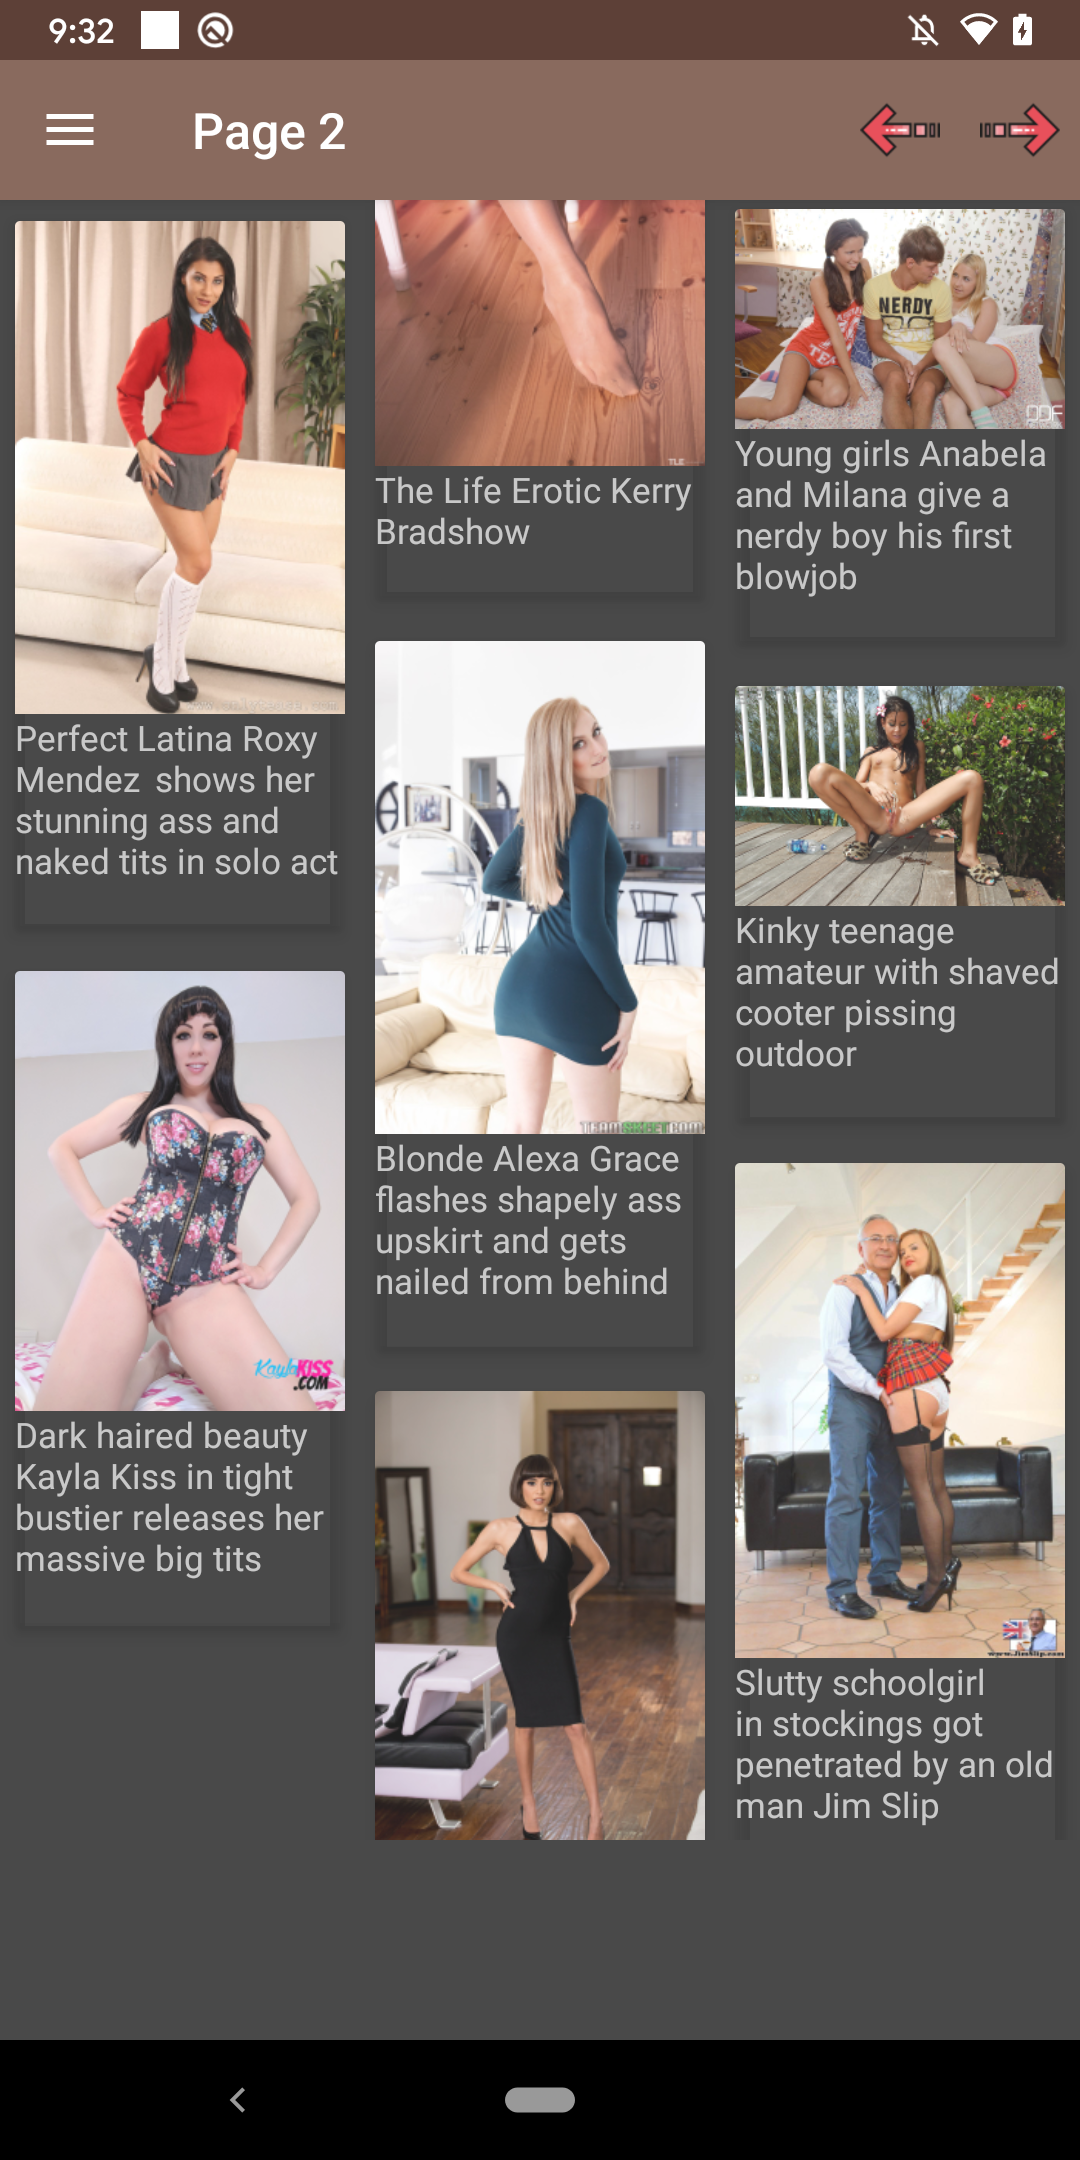 Sexy Teen Galleries collection,best,free,hot,mobile,adult,apk,pics,pic,porn,perfect,picture,sexy,hentai,pornstars,apps,app,android,shemales,galleries